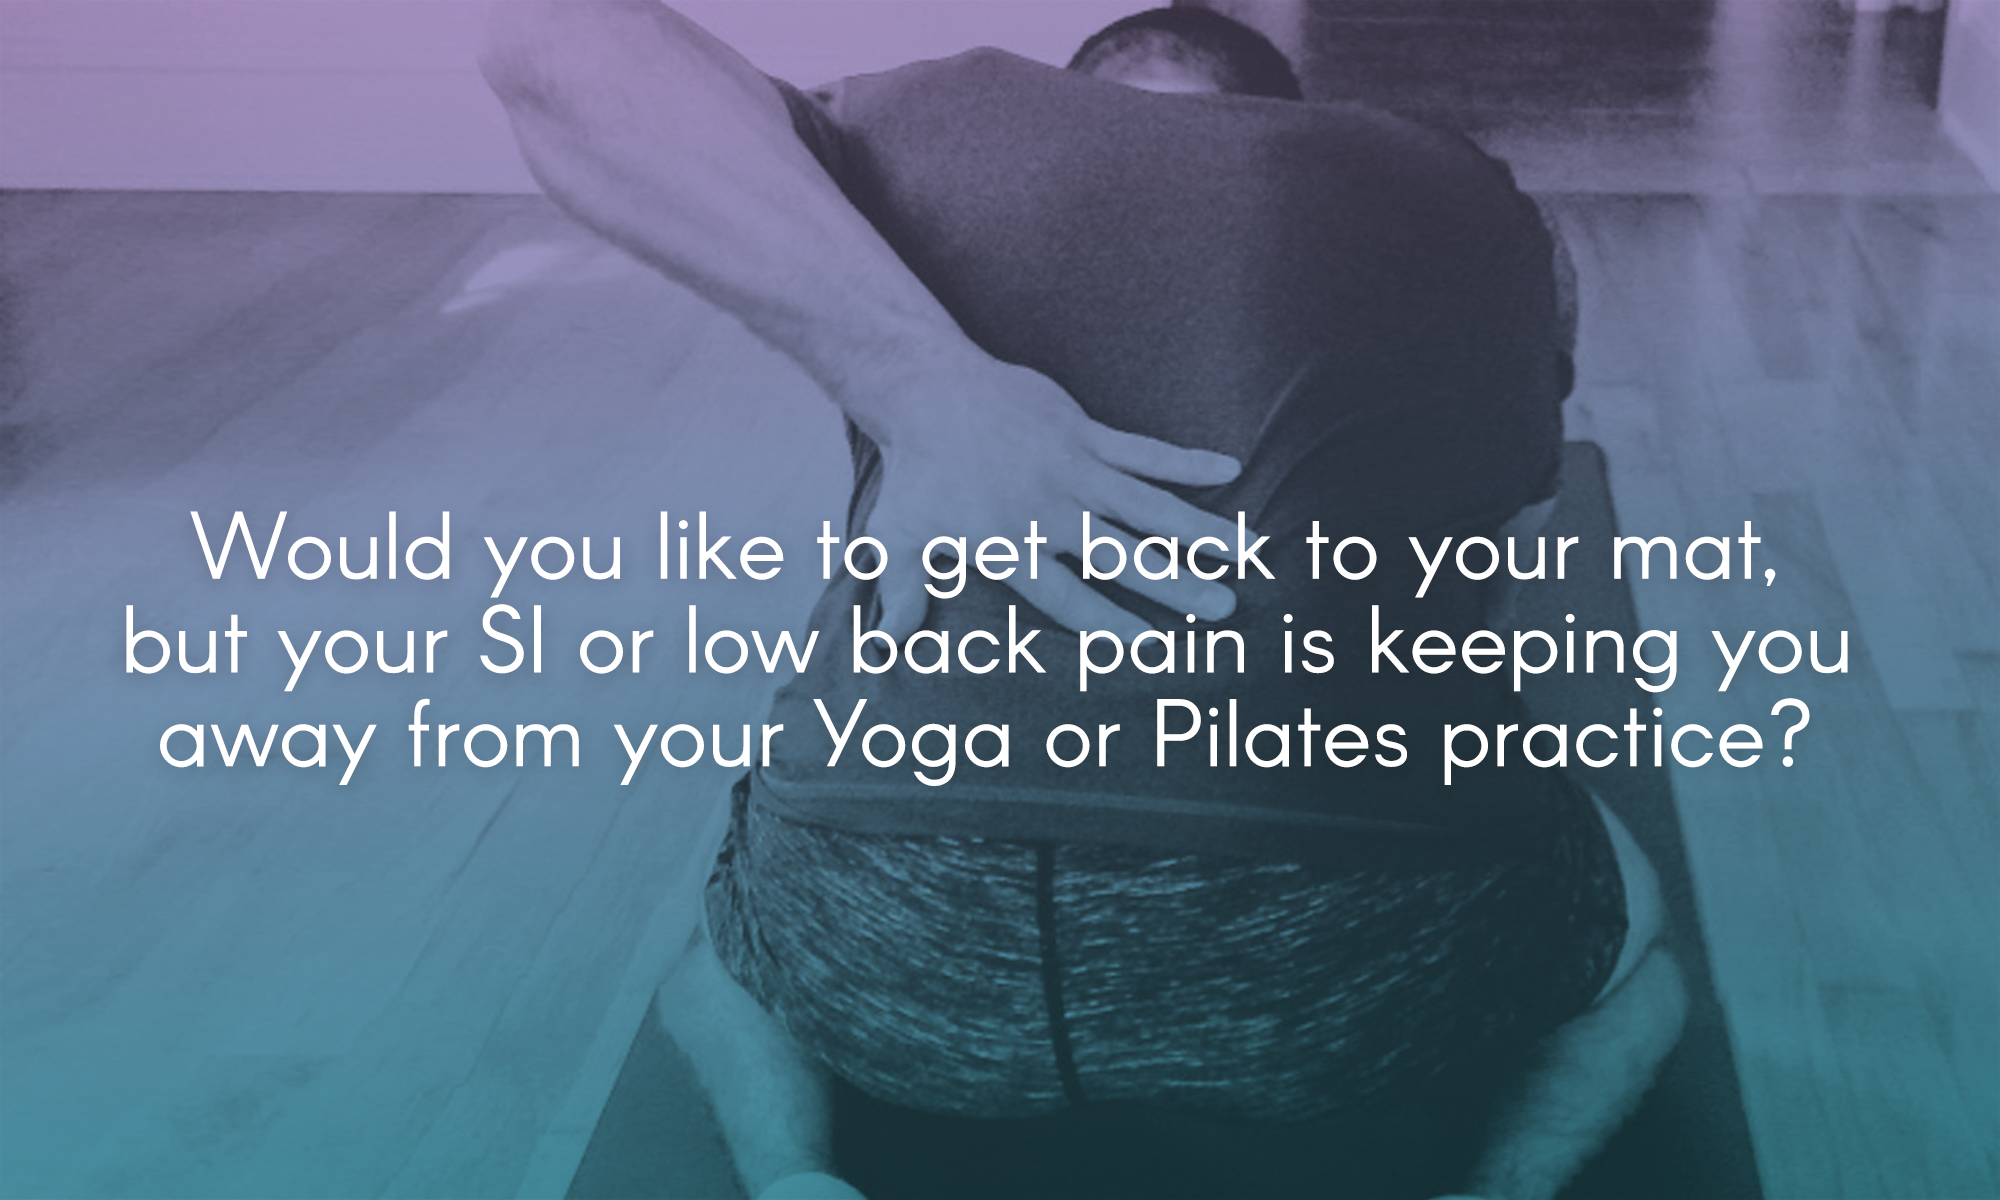  Would you like to get back to your mat, but your SI or low back pain is keeping you away from your Yoga or Pilates practice?&nbsp; 